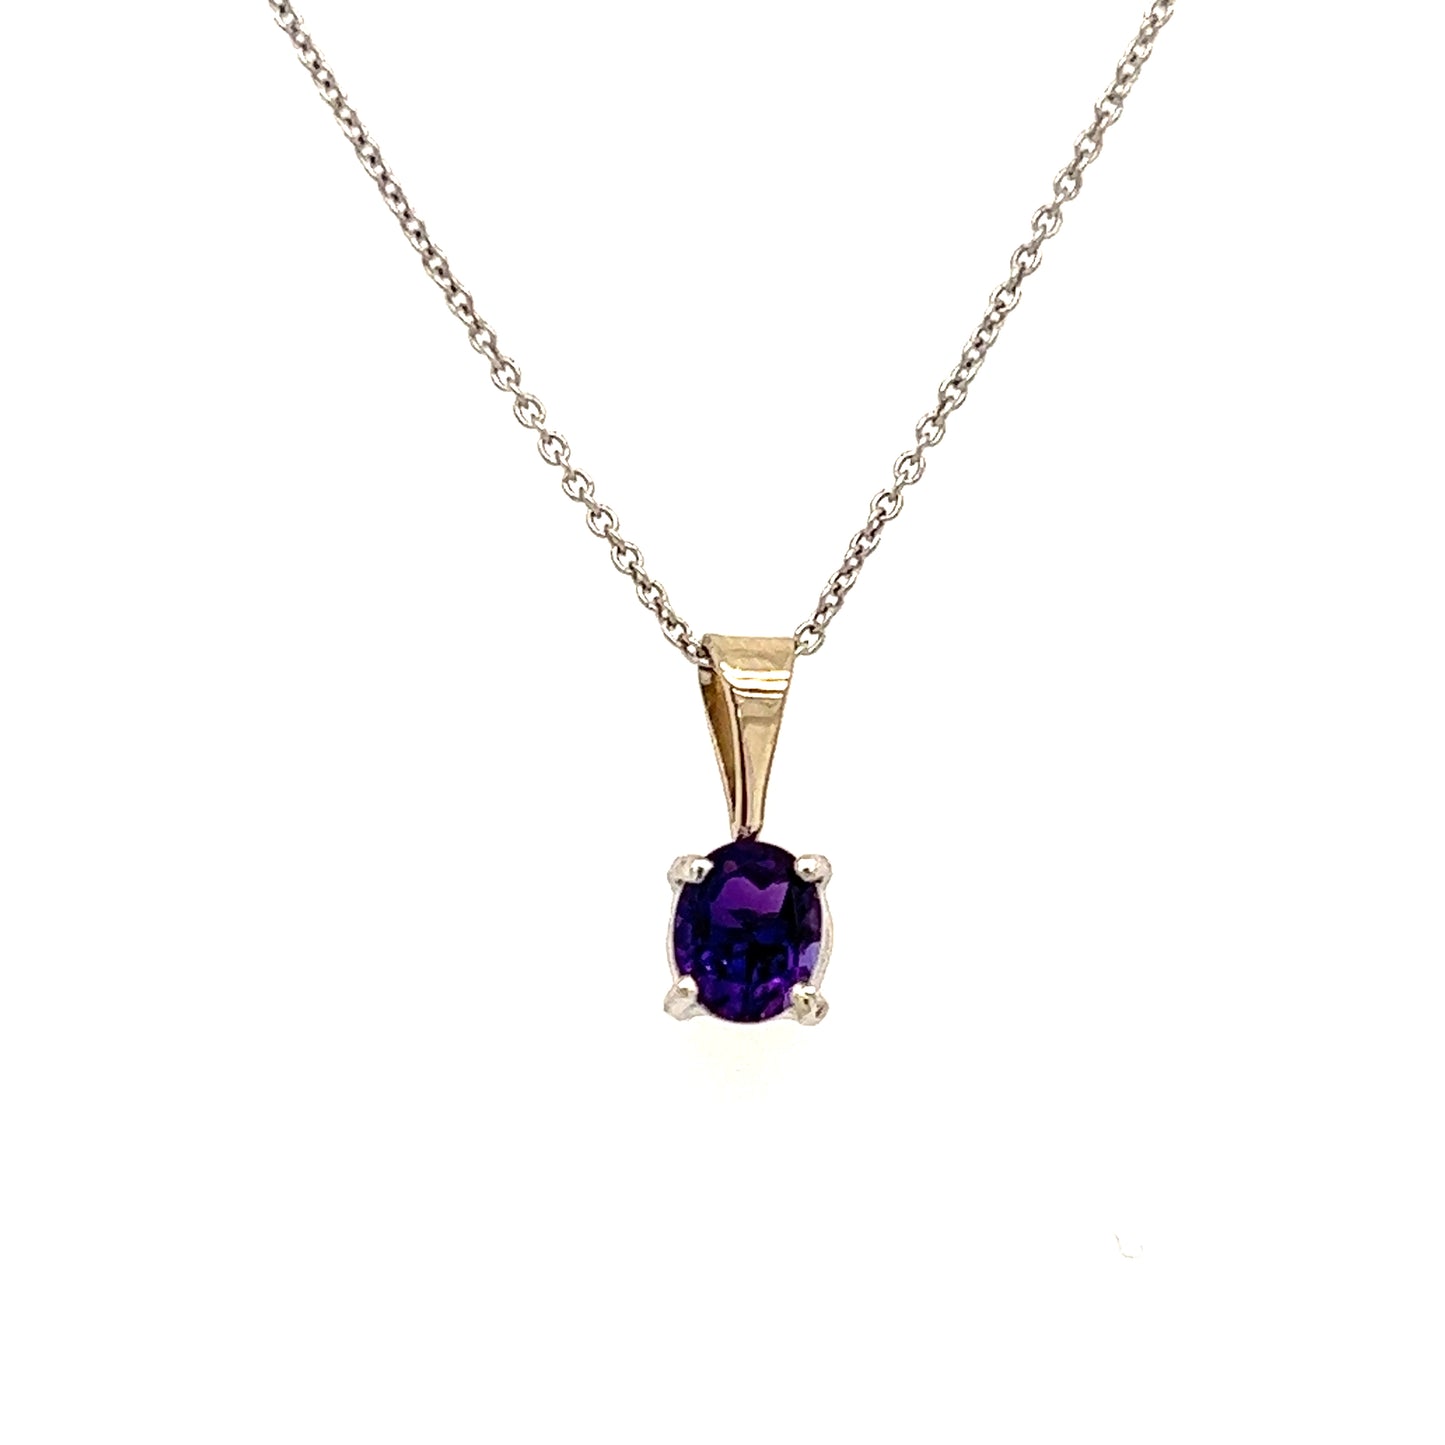 Solitaire Amethyst Pendant in 14K White Gold Front View Pendant and Chain